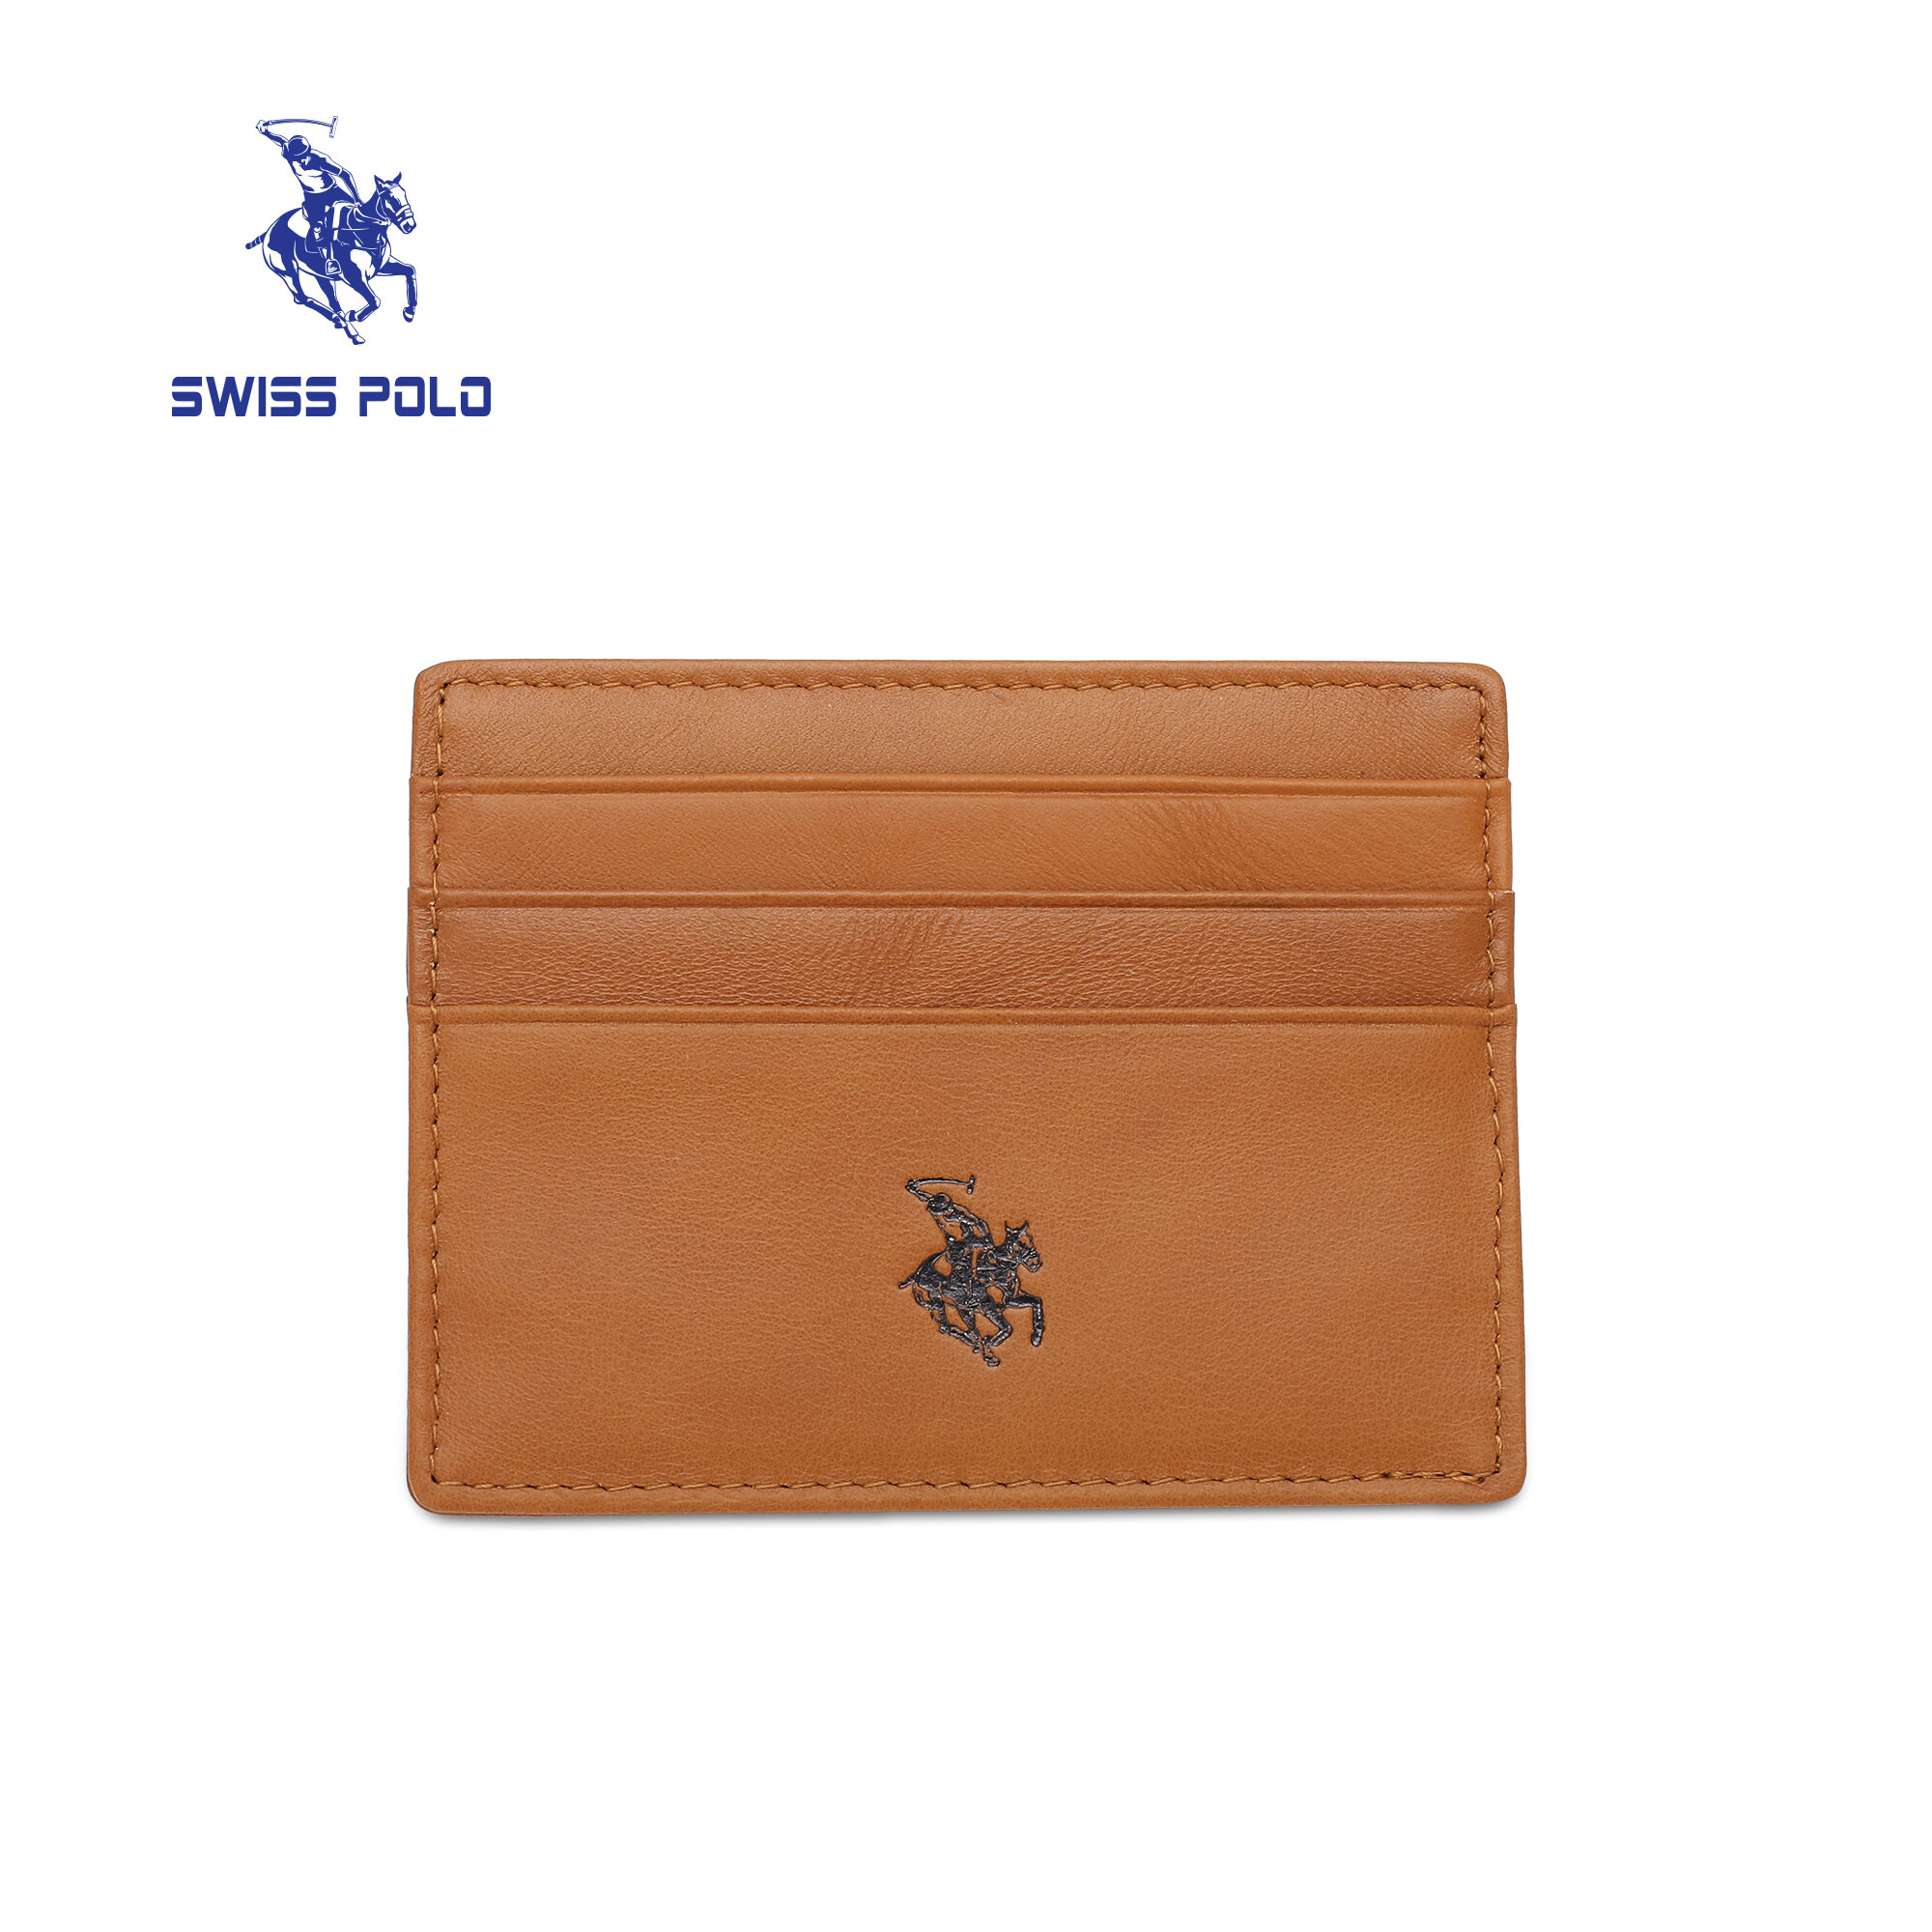 SWISS POLO Genuine Leather RFID Coin/Card Pouch/Card Holder SW 161-2 BROWN